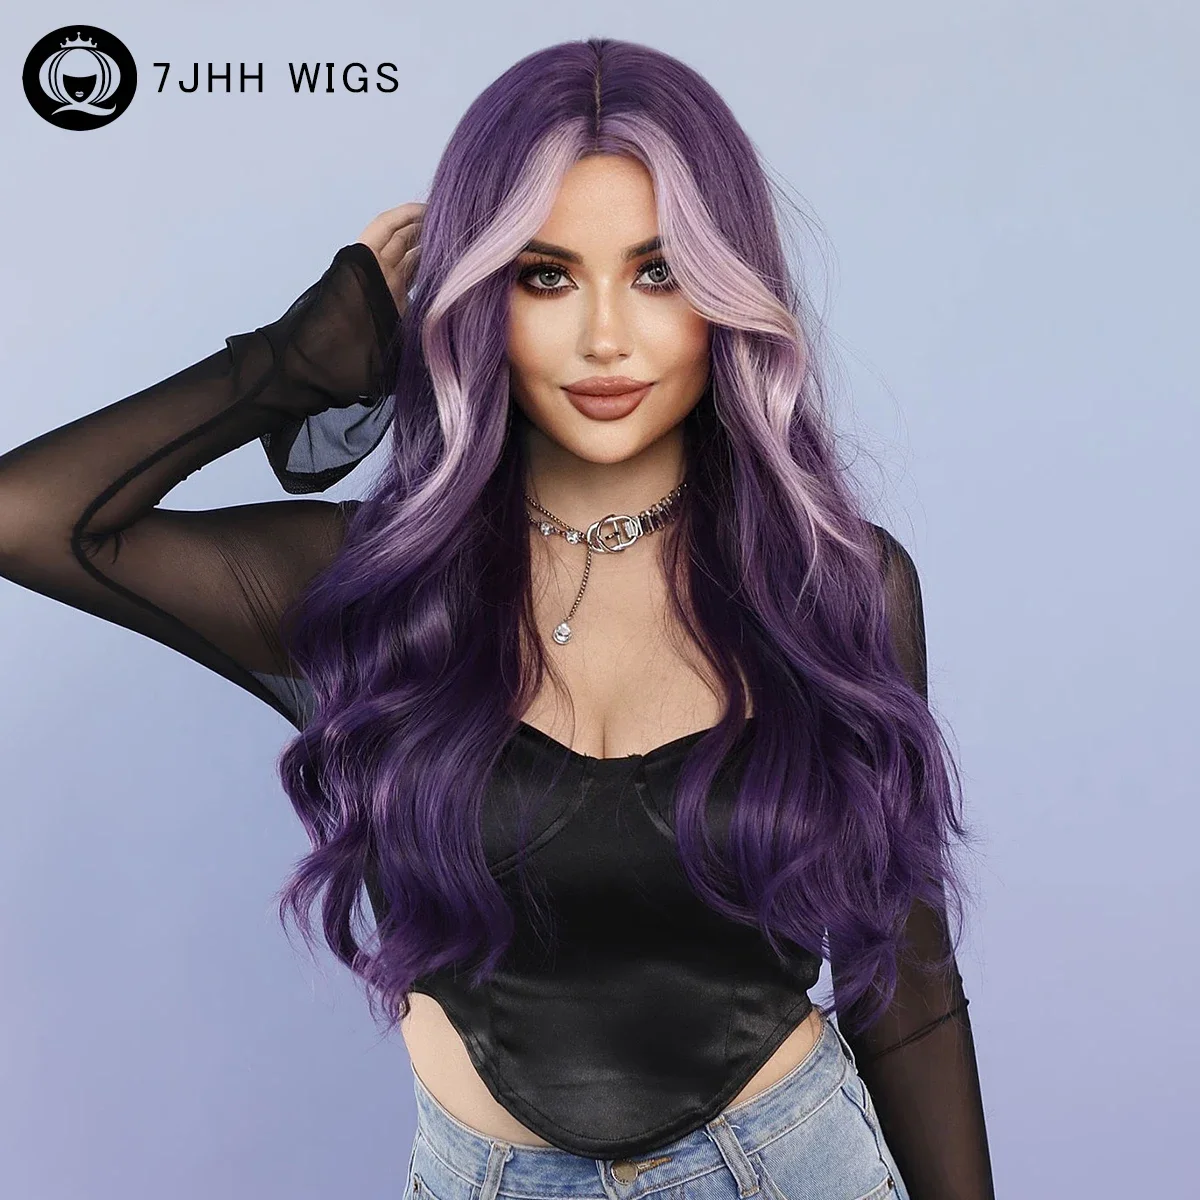 High Density Synthetic Body Wavy Dark Purple Wig for Women Daily Party Loose Long Curly Hair Wigs with Bangs Heat Resistant